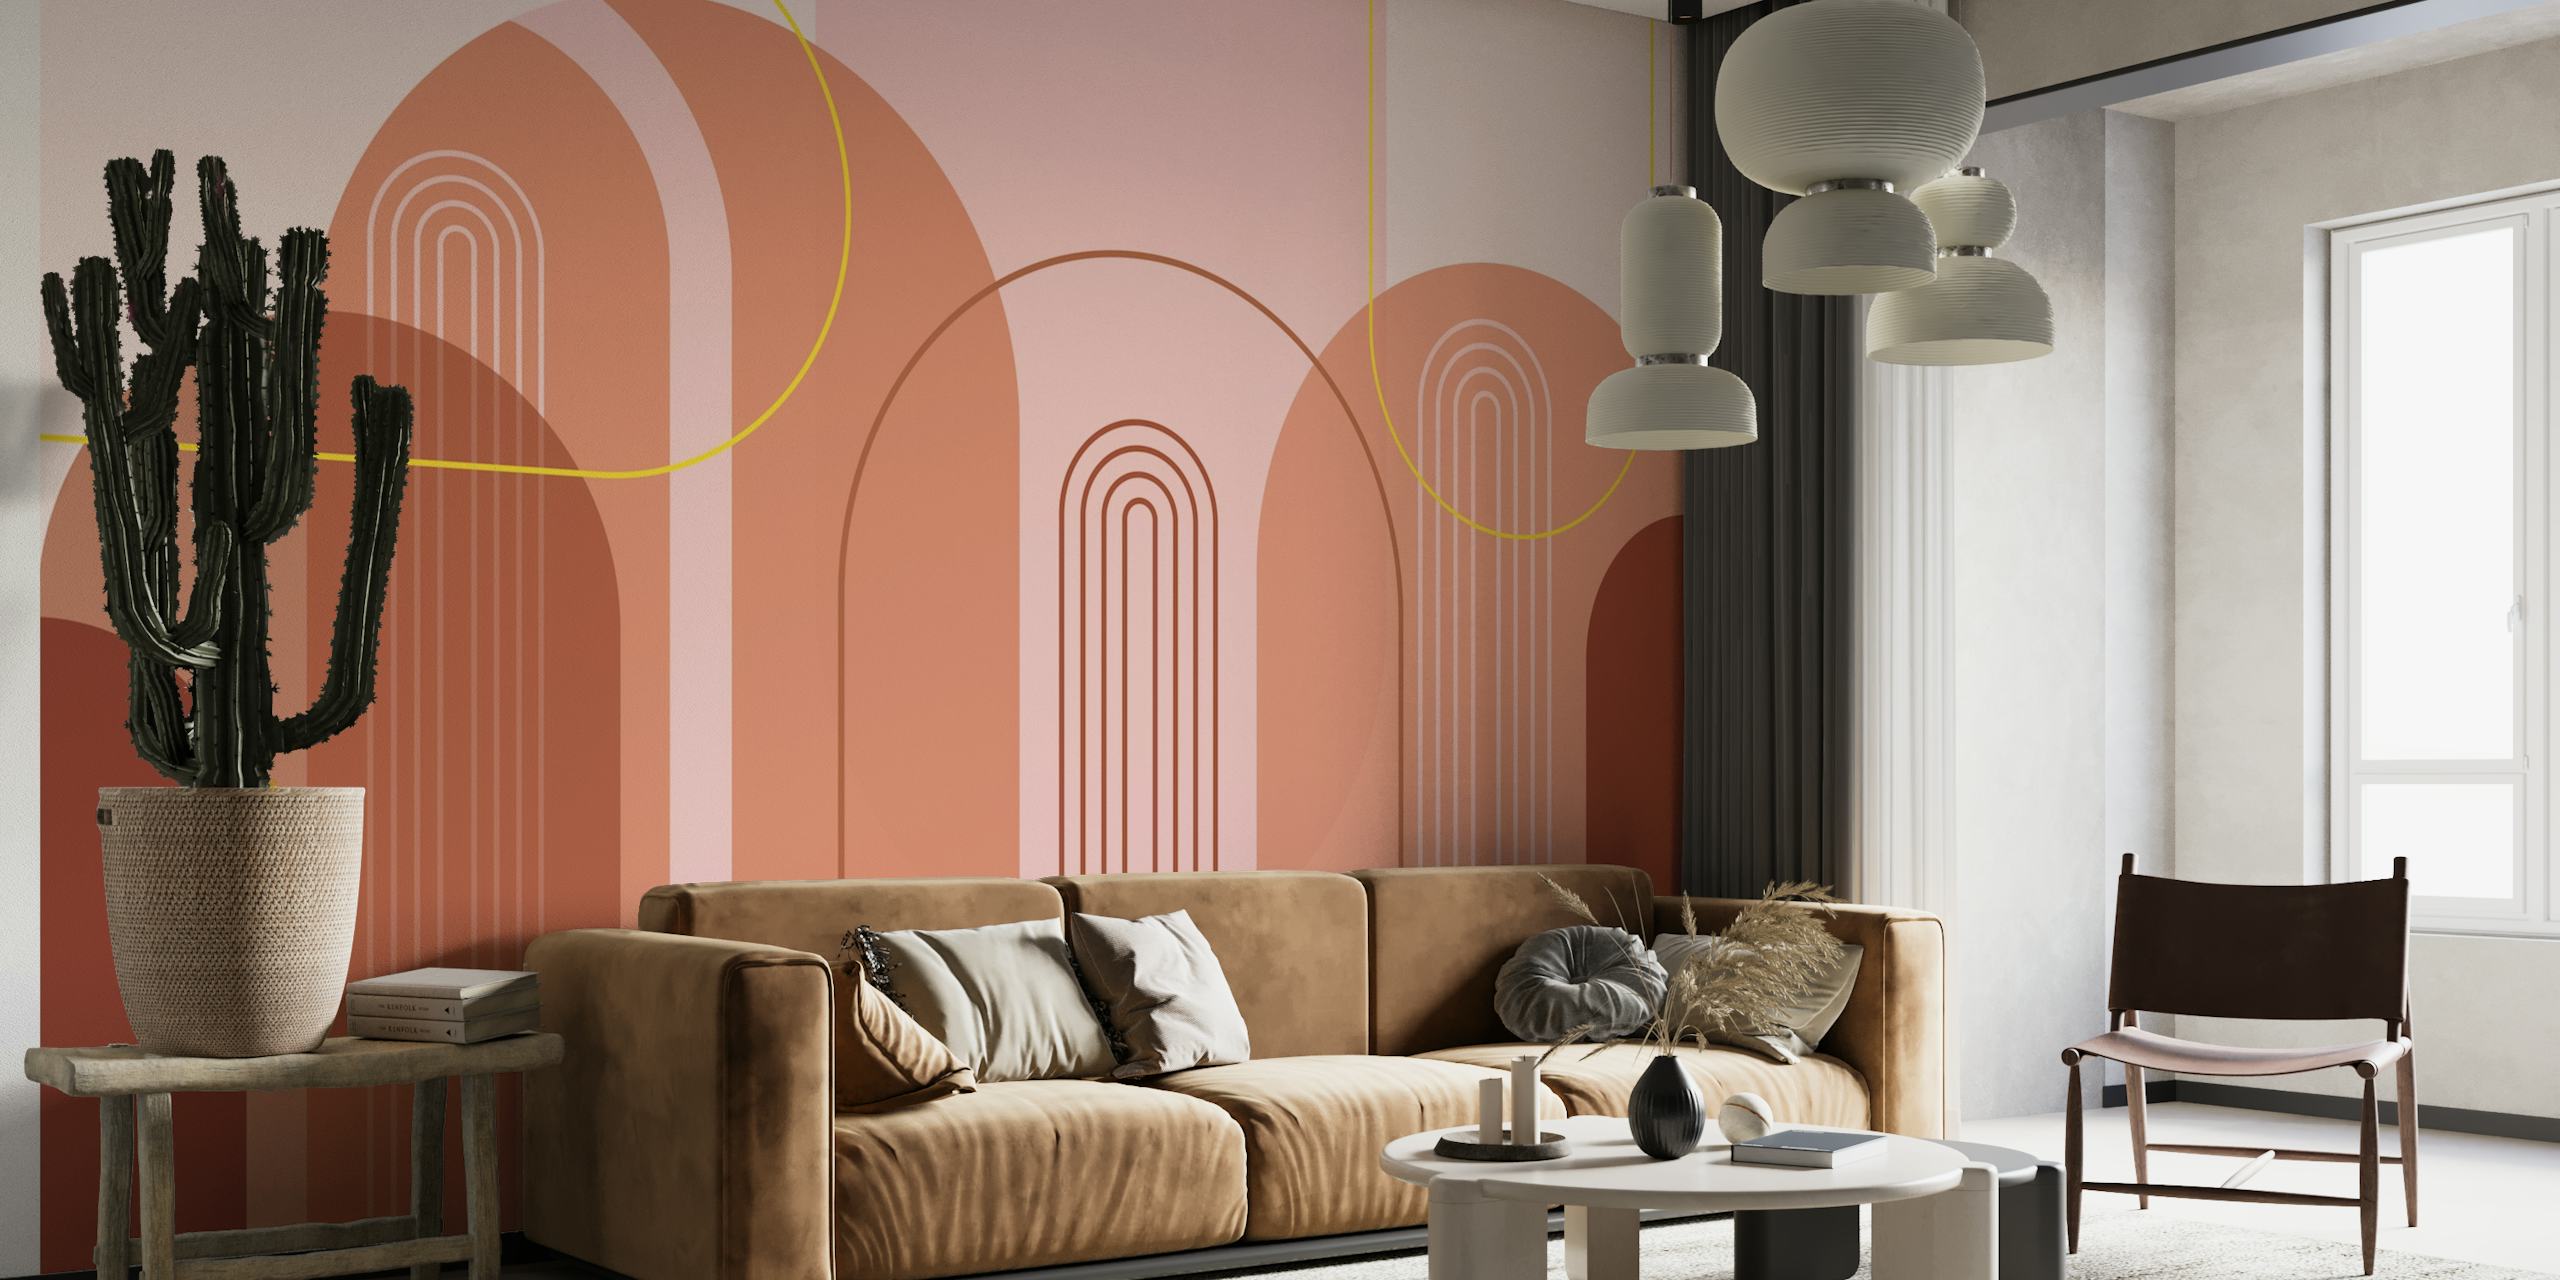 Abstract mid-century modern arches wall mural with pink, beige, maroon, and gold colors